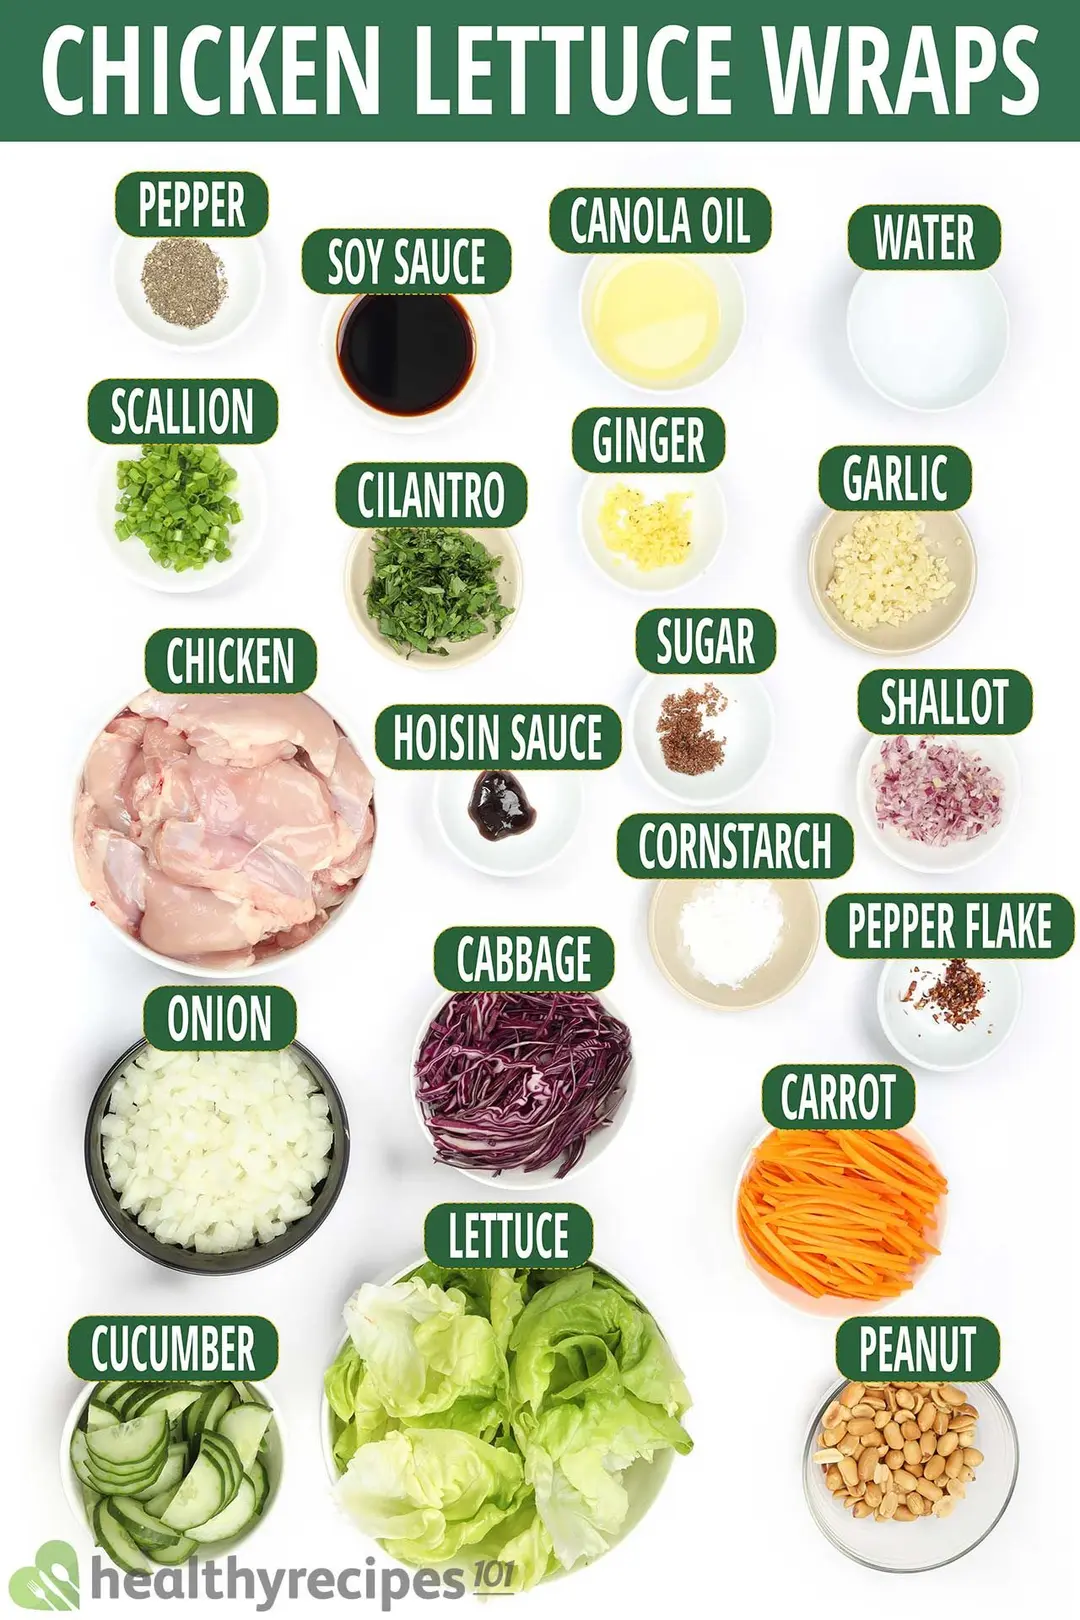 Ingredients for lettuce wraps, including lettuce leaves, julienned carrots, half-moon sliced cucumbers, red cabbage ribbons, peanuts, and various condiments